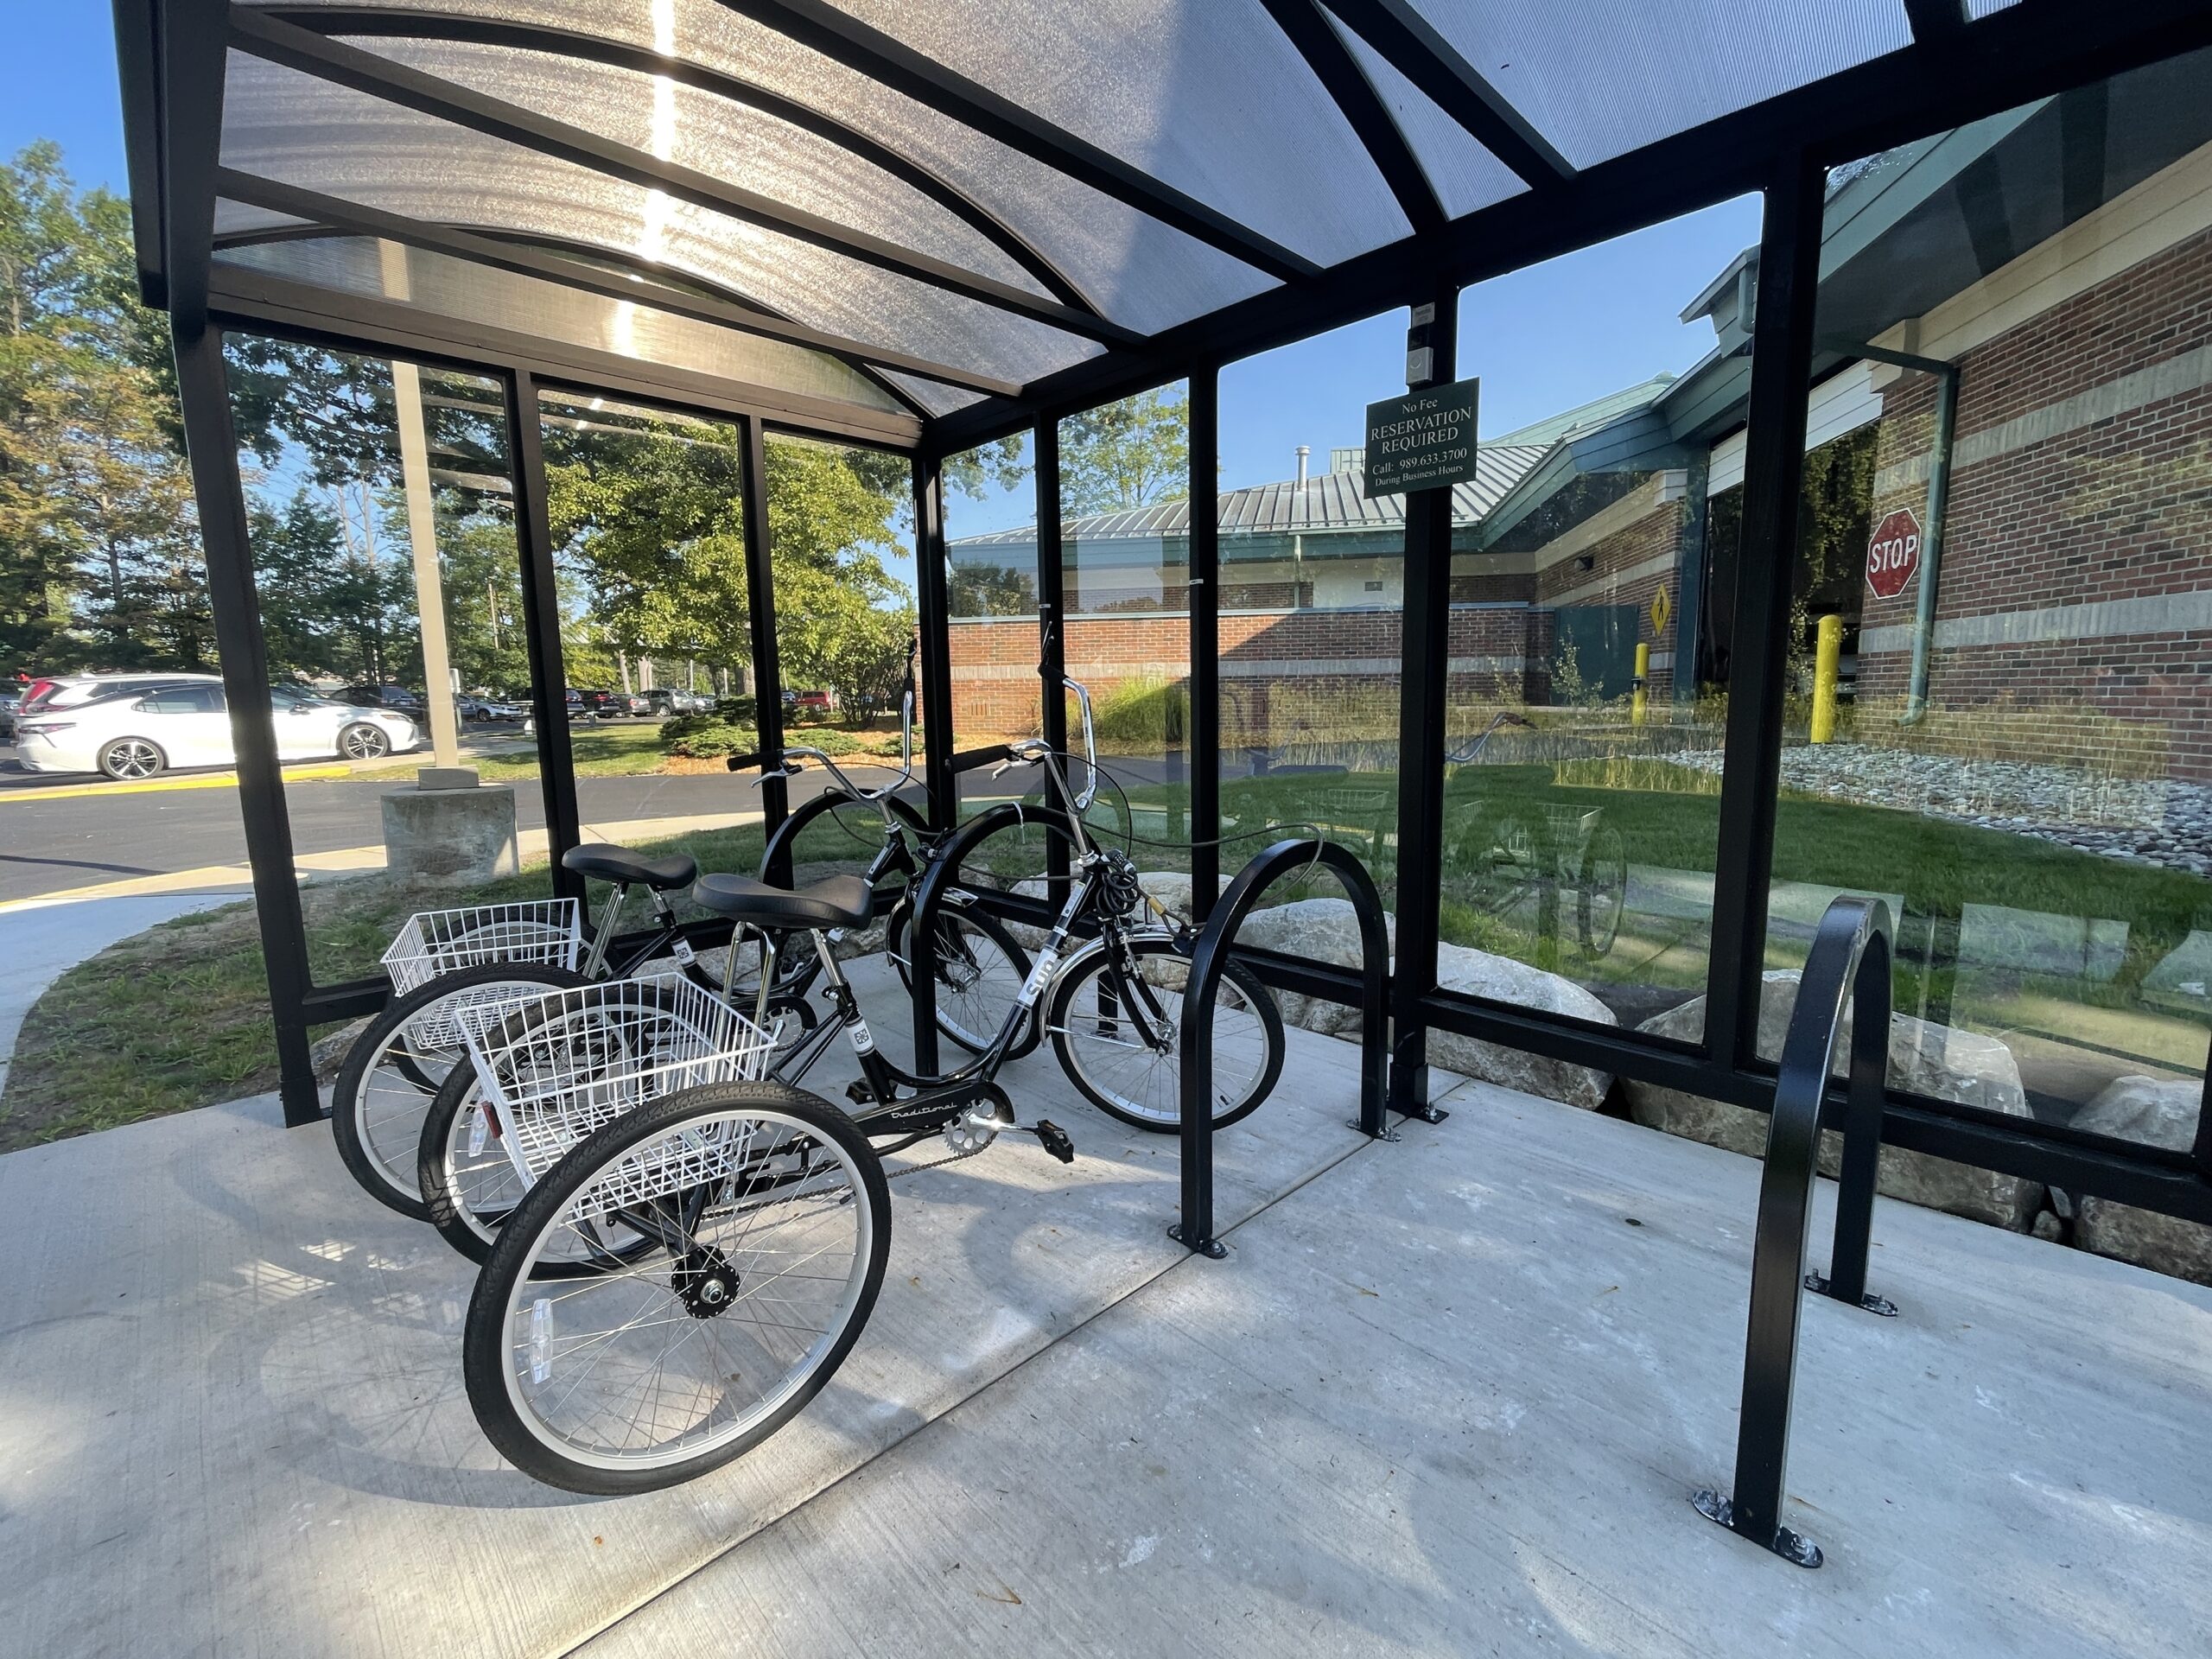 Trailside Center offers the ability to reserve a three-wheeled bike for 4-hour time blocks once per day. The bikes are located within a shelter adjacent to the Rail Trail at the end of the Trailside building.